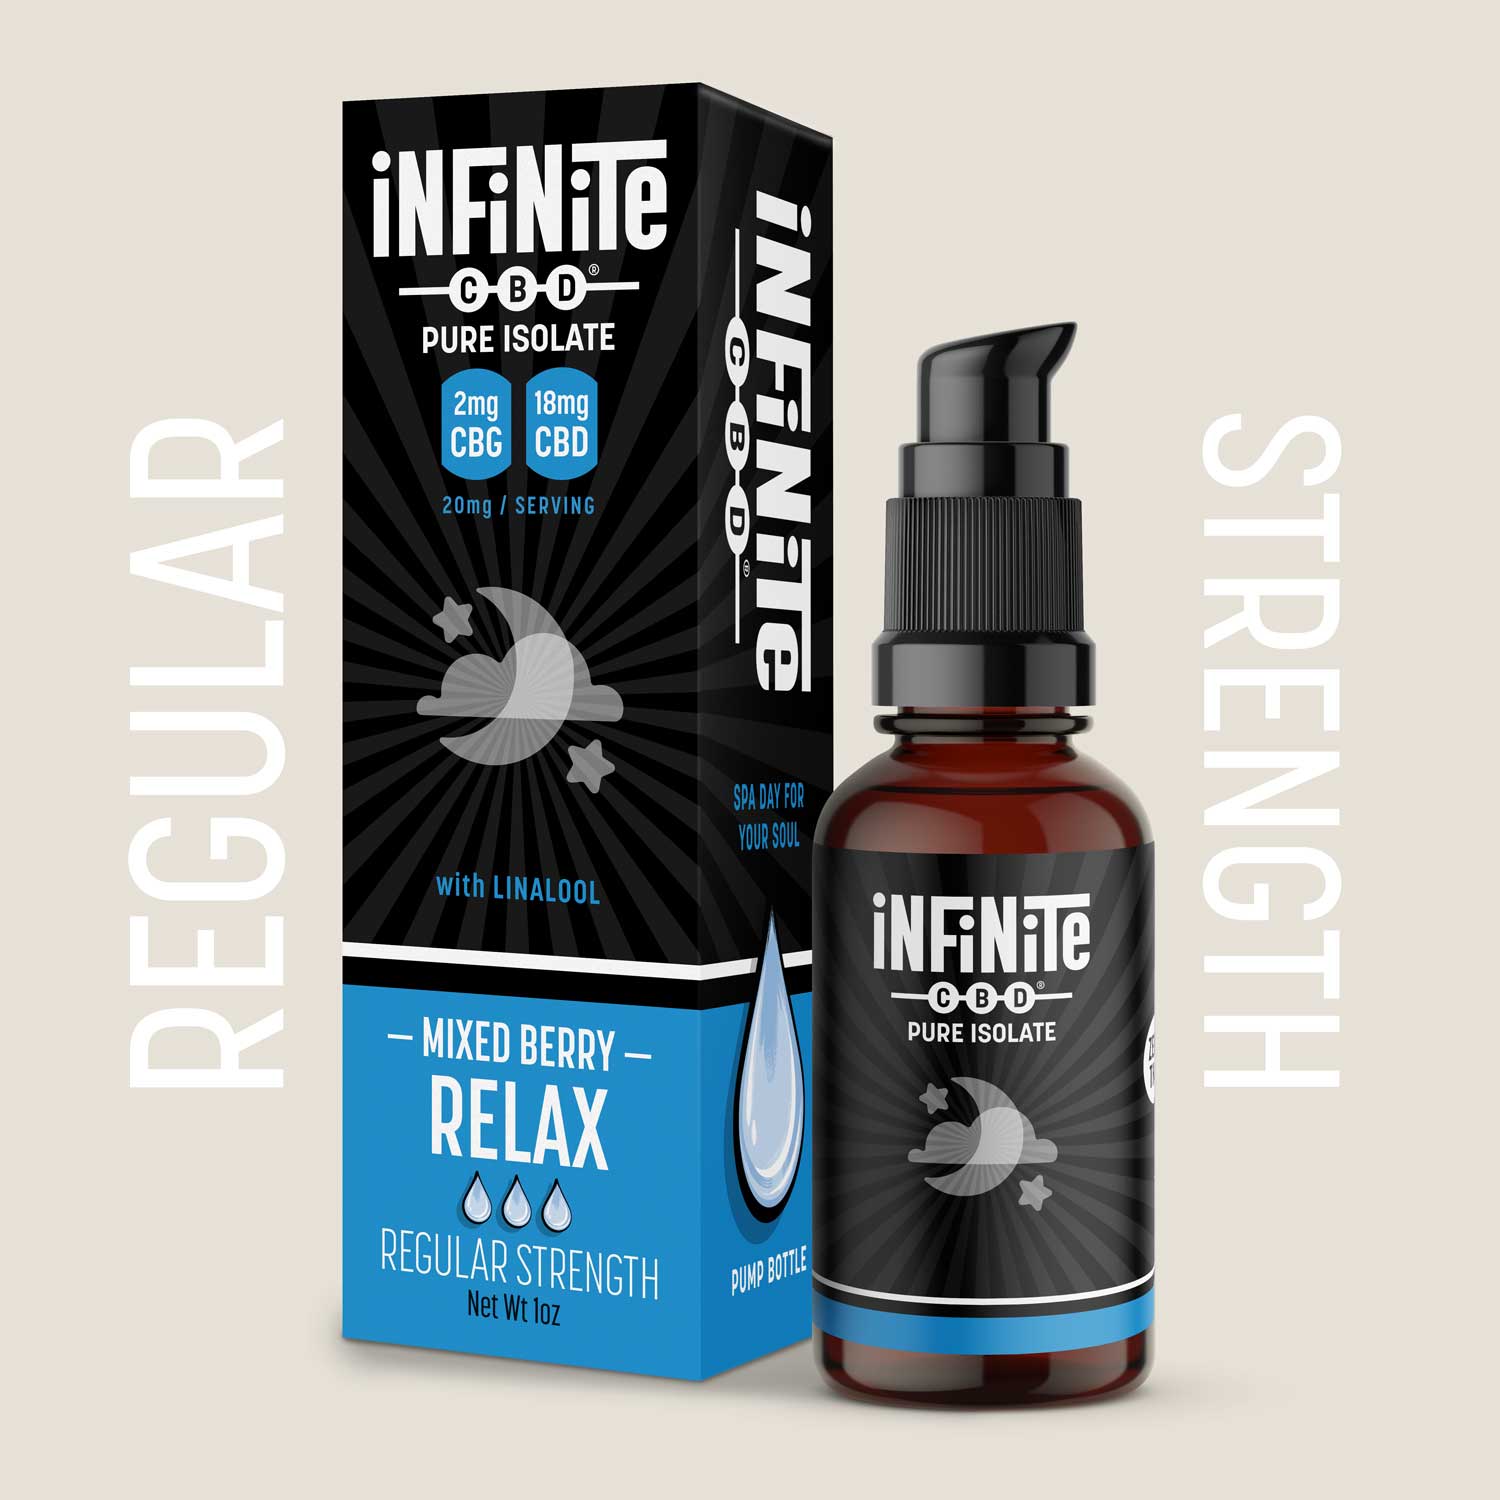 Tinctures<br>Formulation: Relax<br>CBD: Pure Isolate (Zero THC)<br>Strength: Regular (20mg/serving)